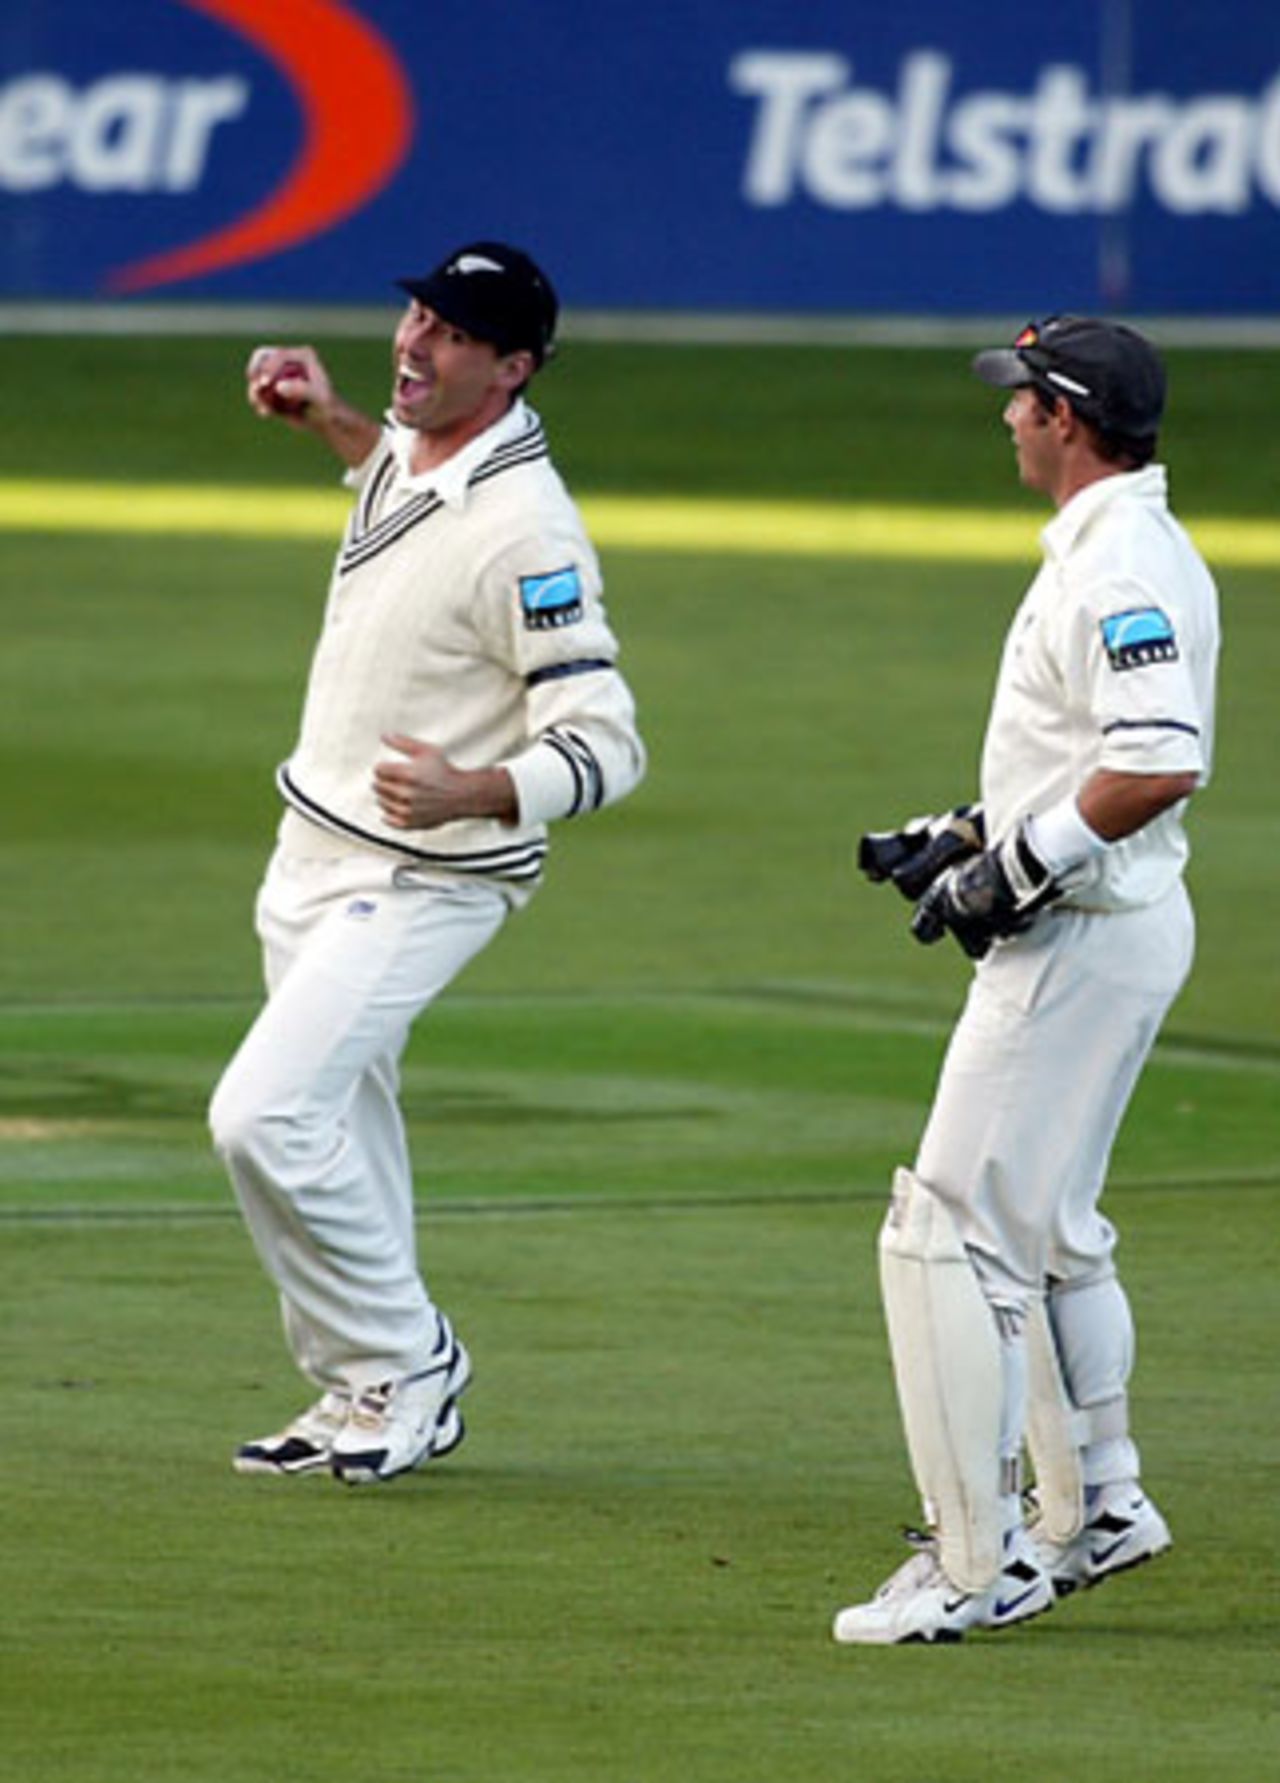 New Zealand fielder Stephen Fleming (left) celebrates the dismissal of England batsman Nasser Hussain, caught from the bowling of Chris Drum for two. Wicket-keeper Adam Parore looks on. 3rd Test: New Zealand v England at Eden Park, Auckland, 30 March-3 April 2002 (1 April 2002).